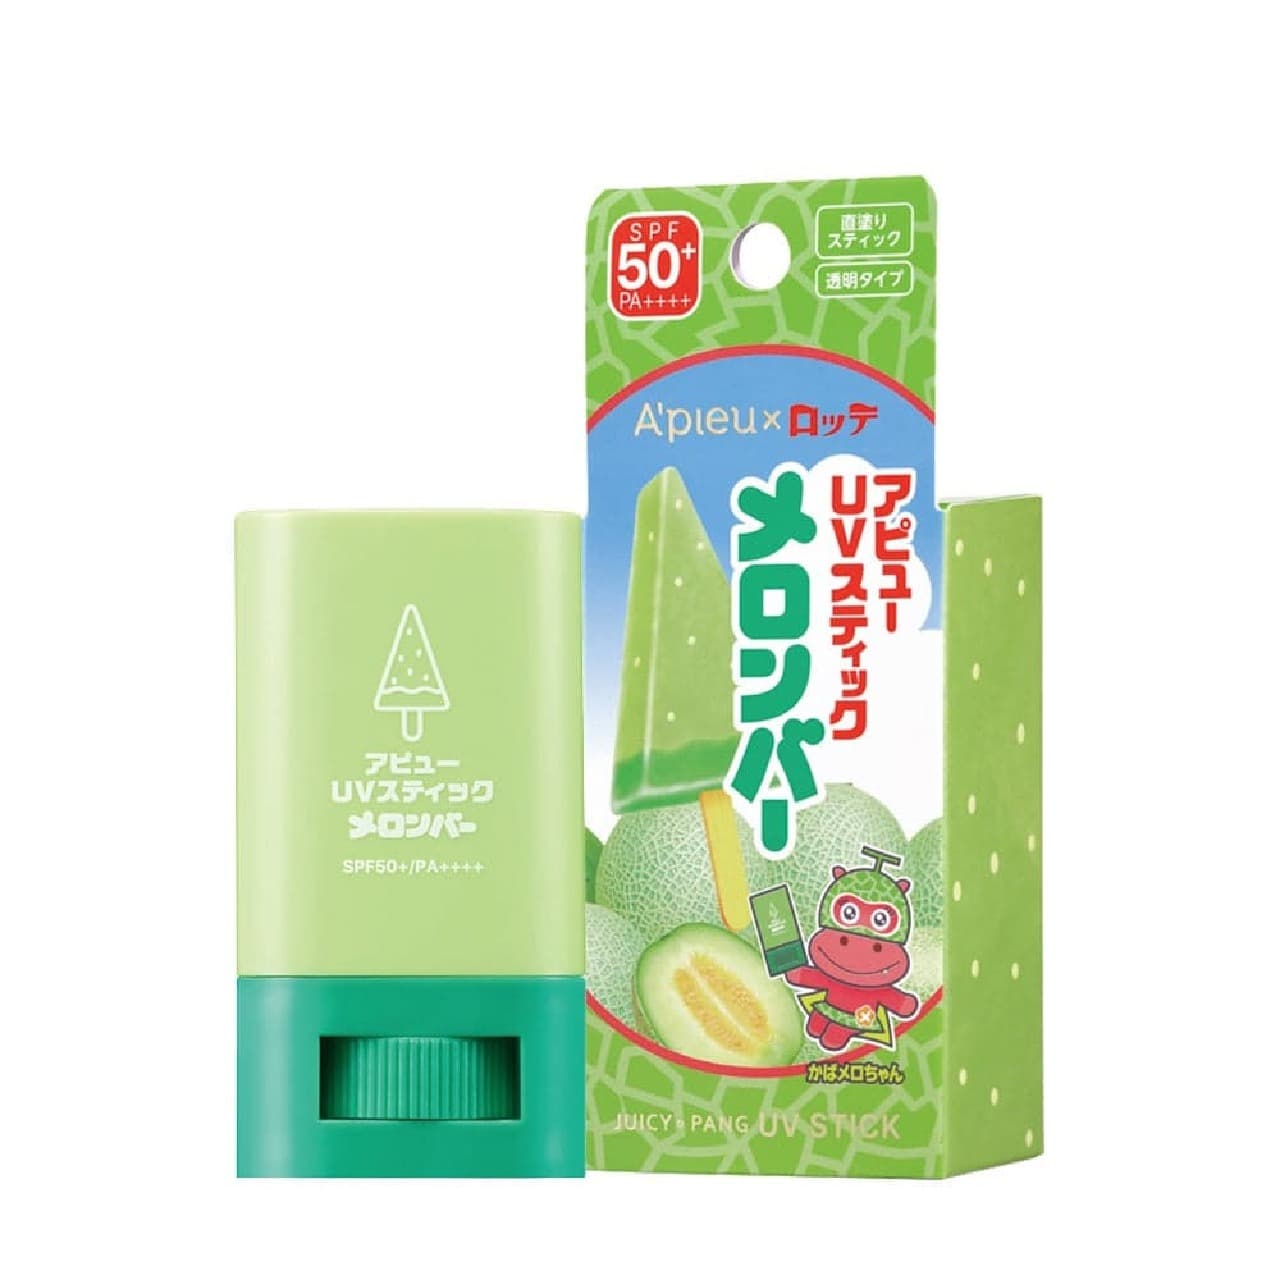 Lotte and Apyu collaborate! Limited “Juicy Pan UV Stick Watermelon Bar/Melon Bar” will be released in limited quantity on March 29th Image 3